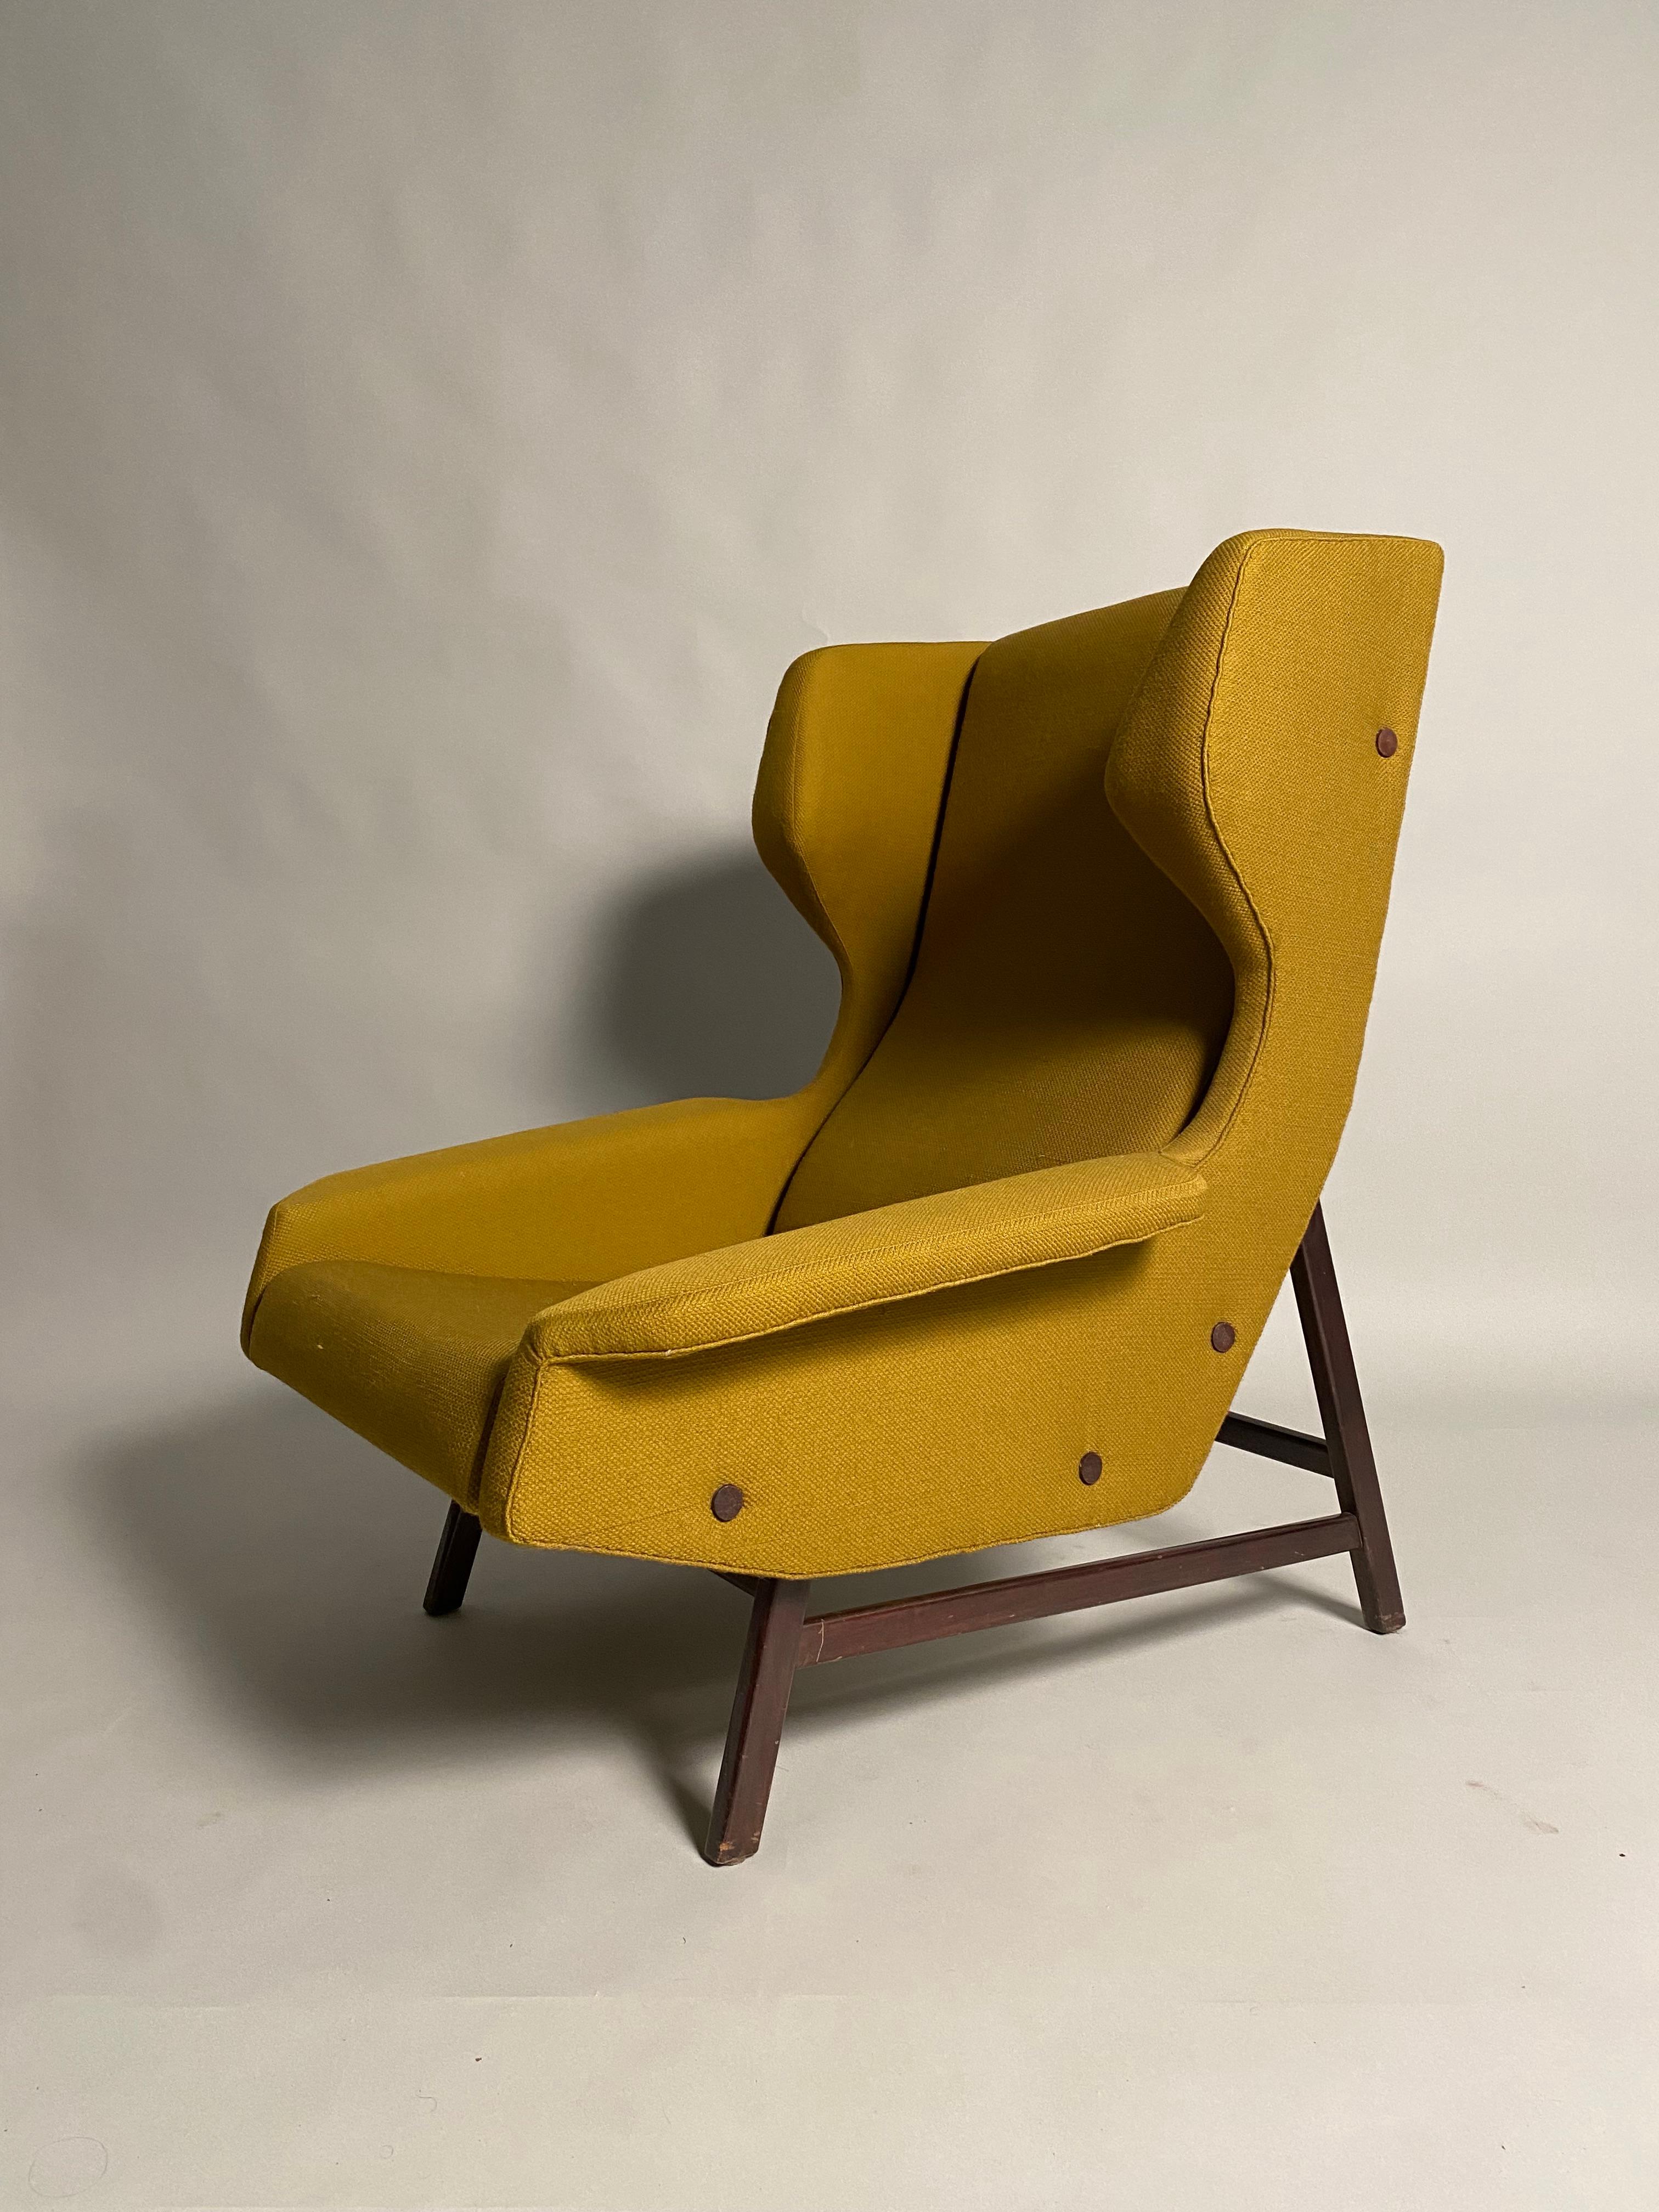 Rare pair of Wingback armchairs from an important chalet in the Italian Alps. Designed by the Italian Architect Gianfranco Frattini for the Cassina company in 1959. The fabric, in excellent conservation conditions, is still the original one selected